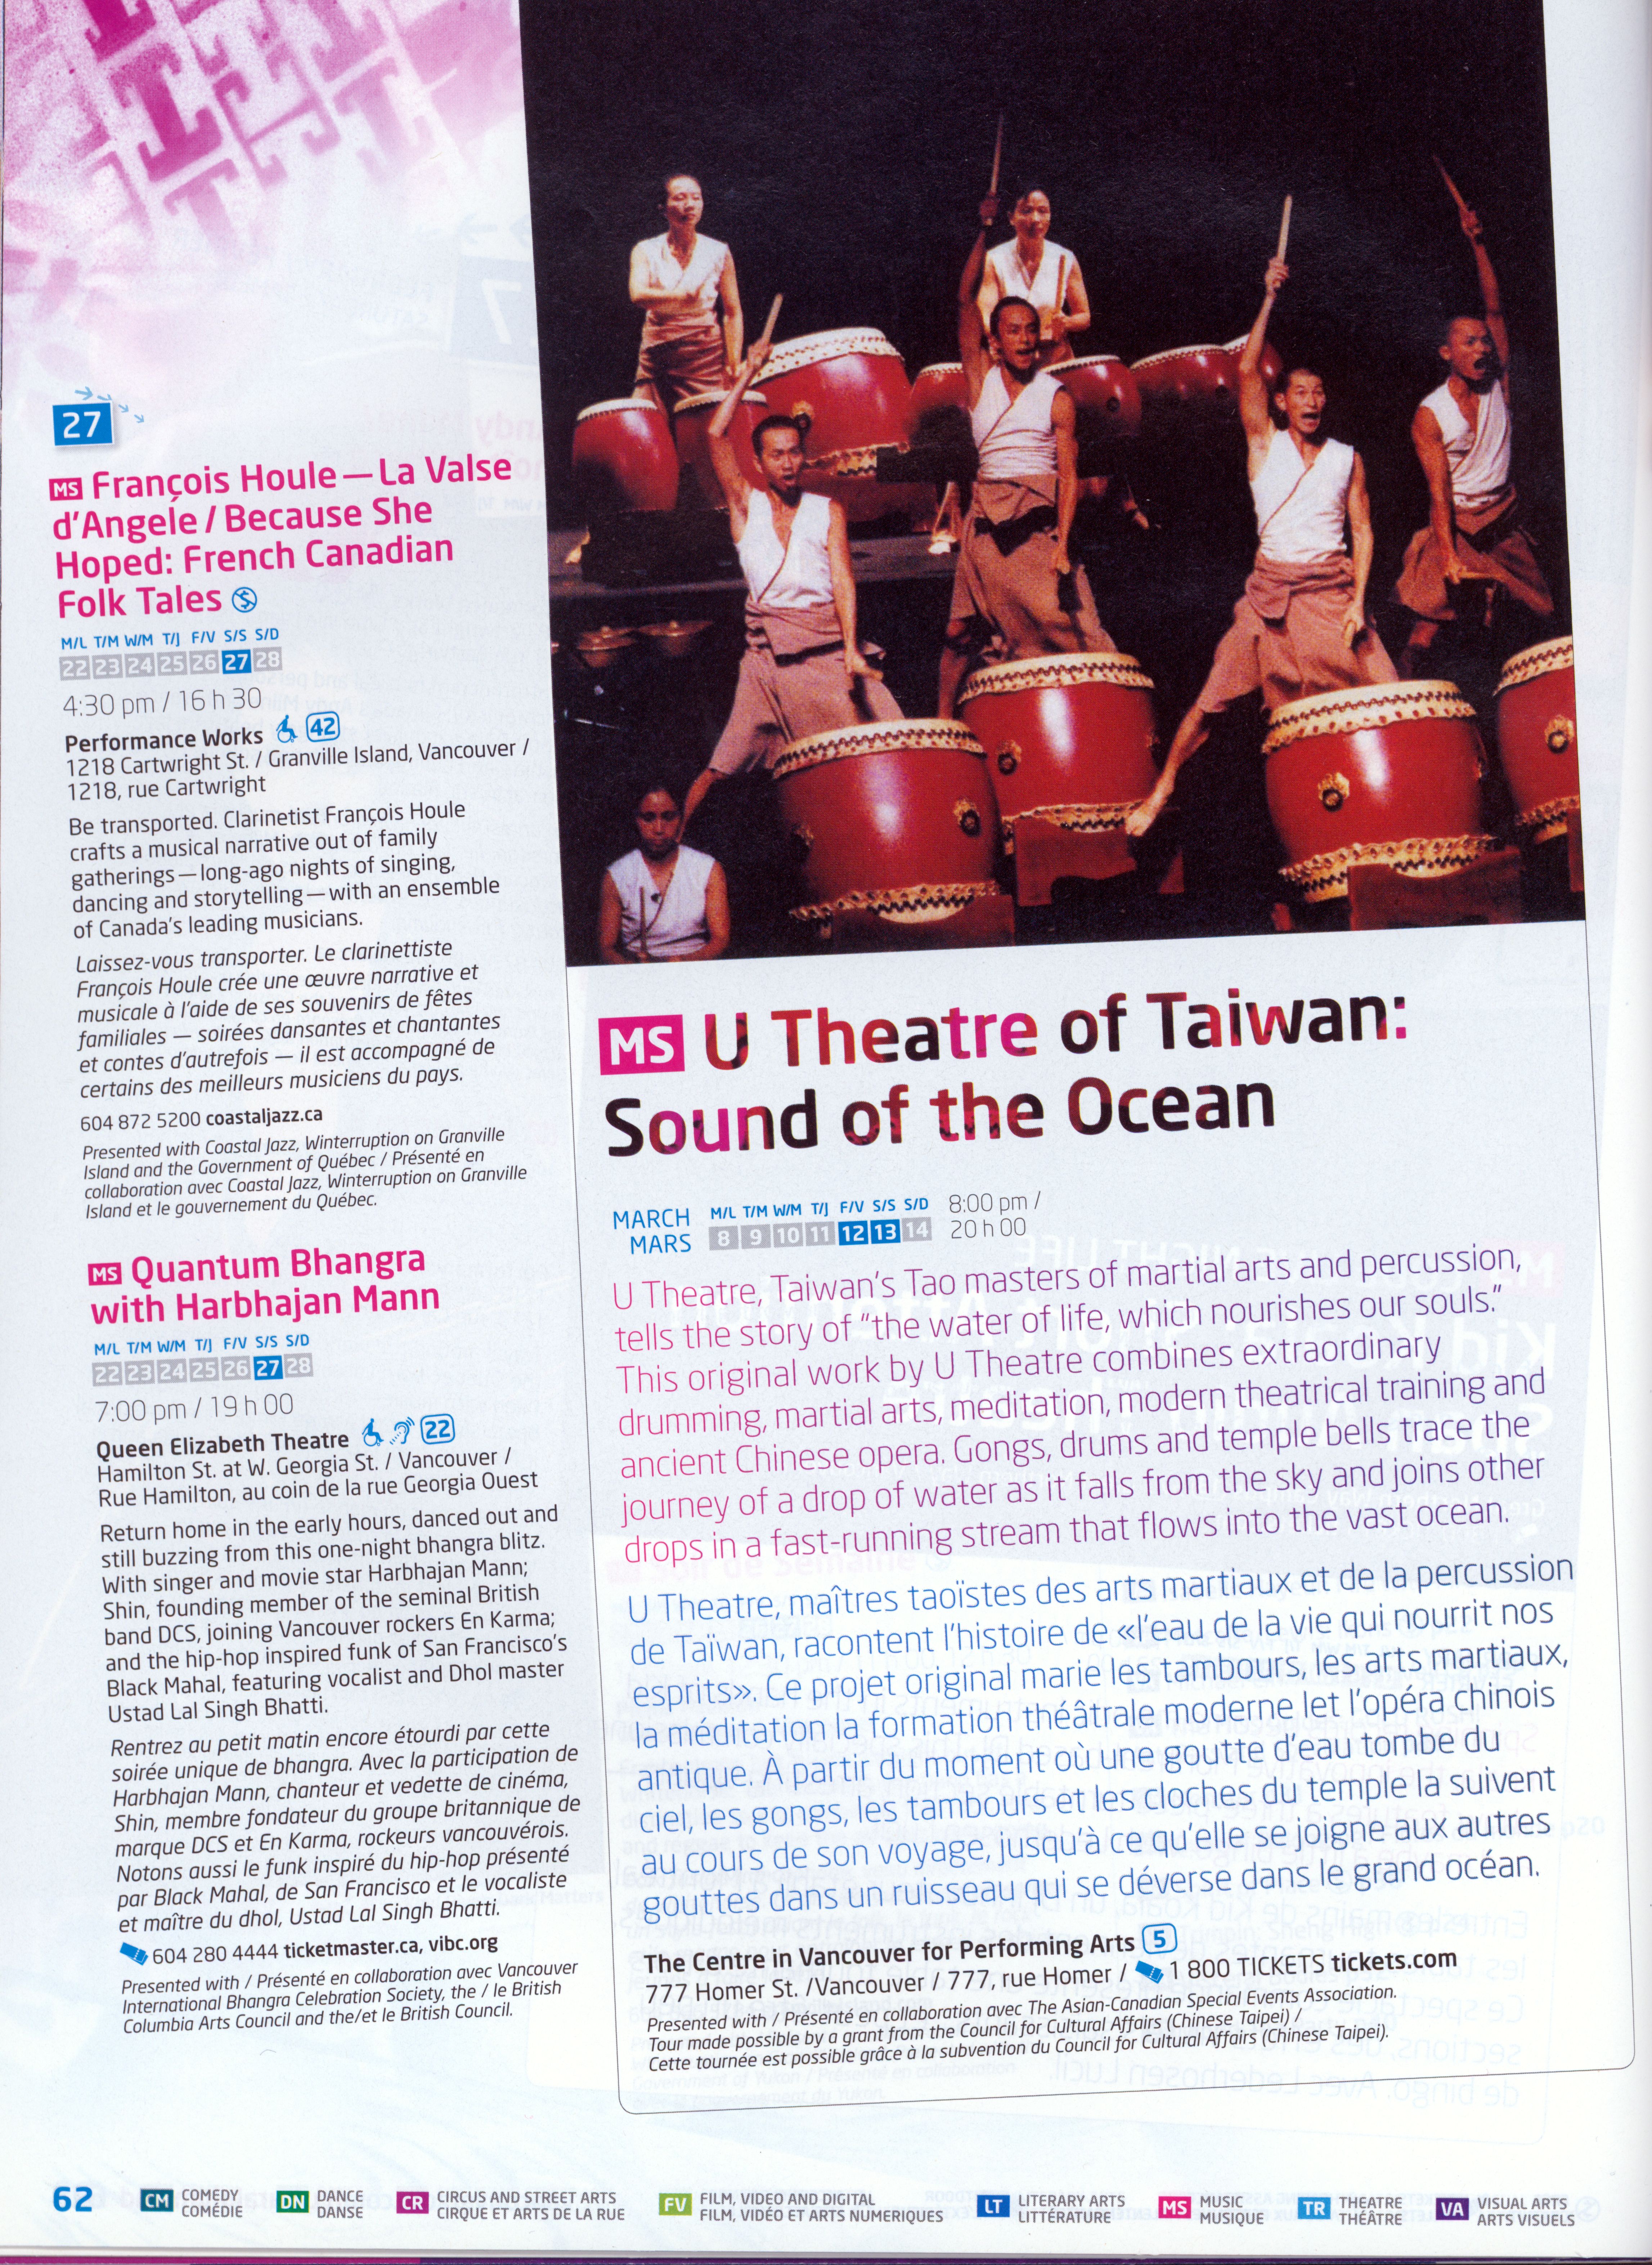 U Theatre of Taiwan: Sound of the Ocean 節目單 (Cultural Olympiad)